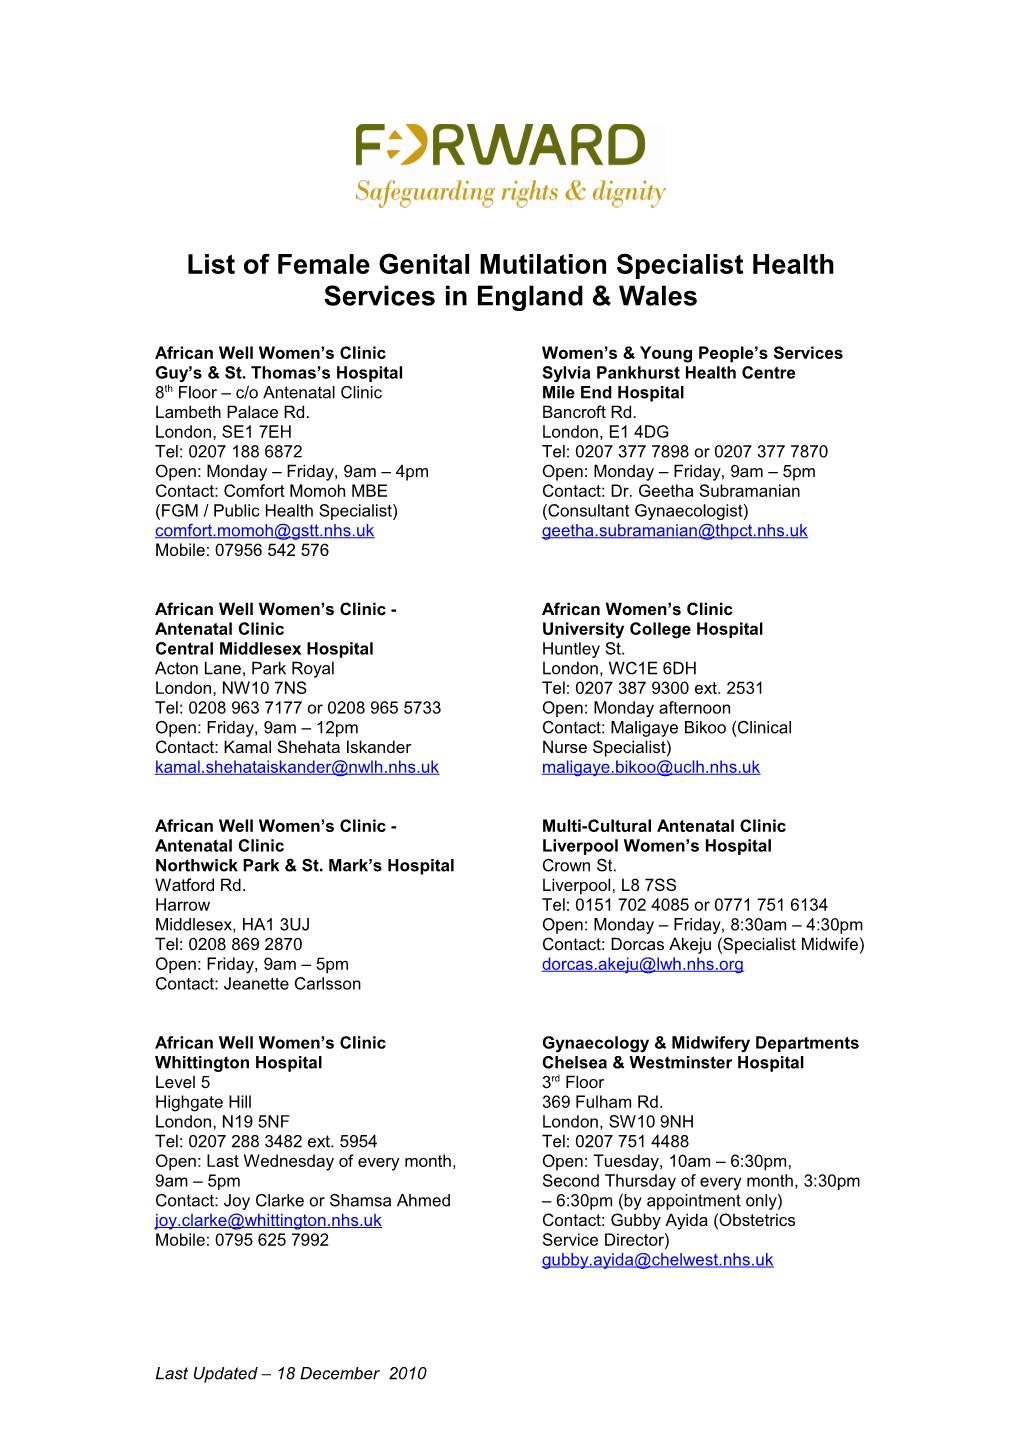 List of Female Genital Mutilation Specialist Health Services in England & Wales